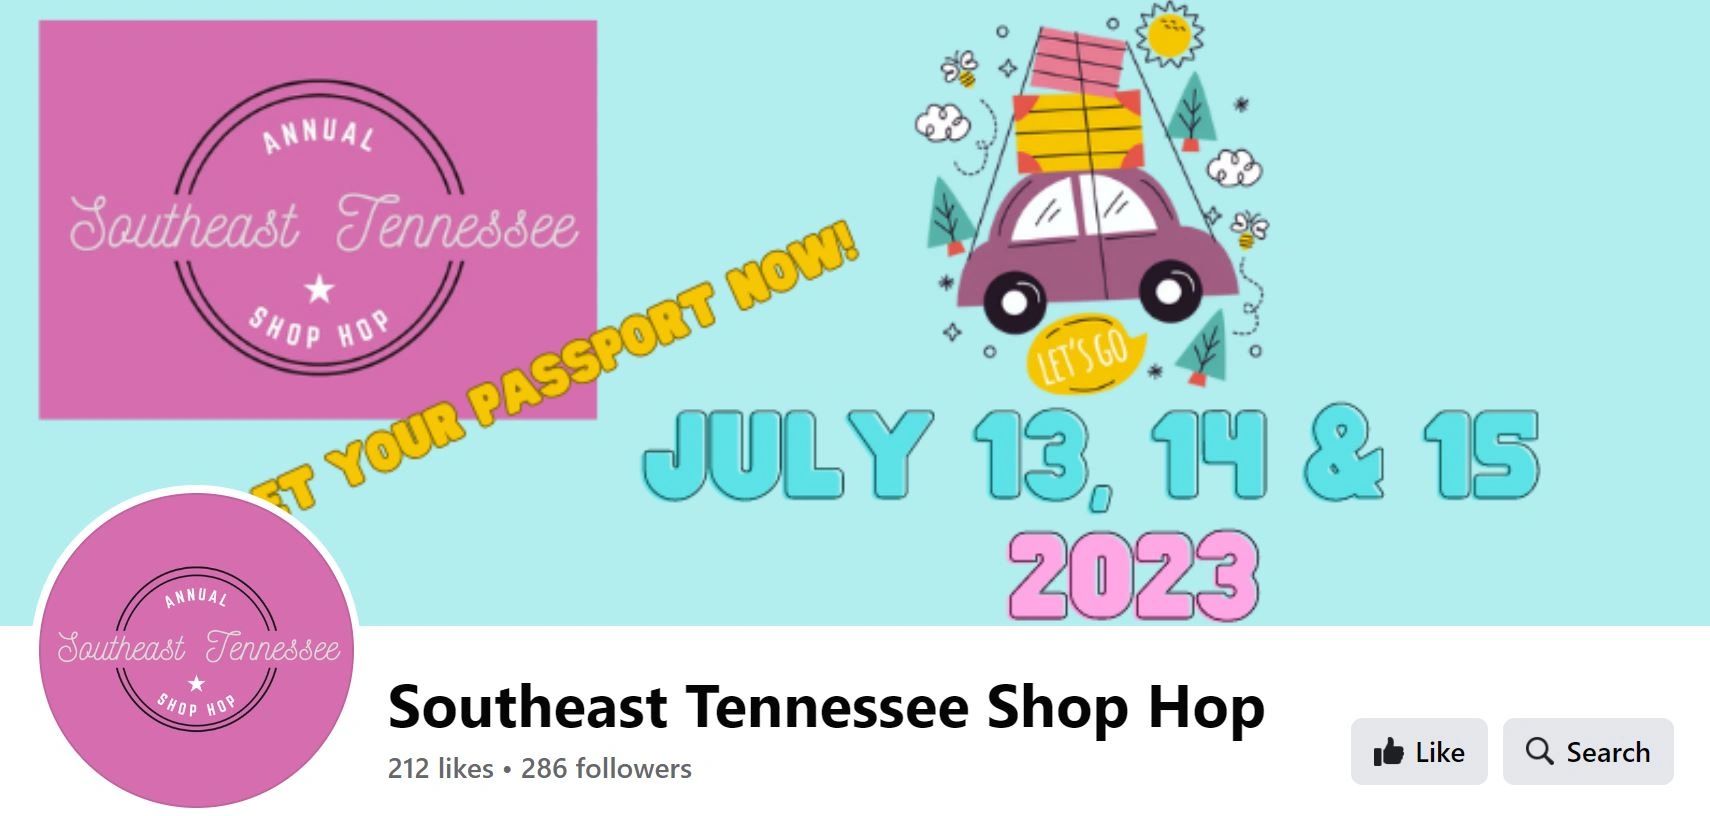 Southeast Tennessee Shop Hop Tickets on Sale NOW